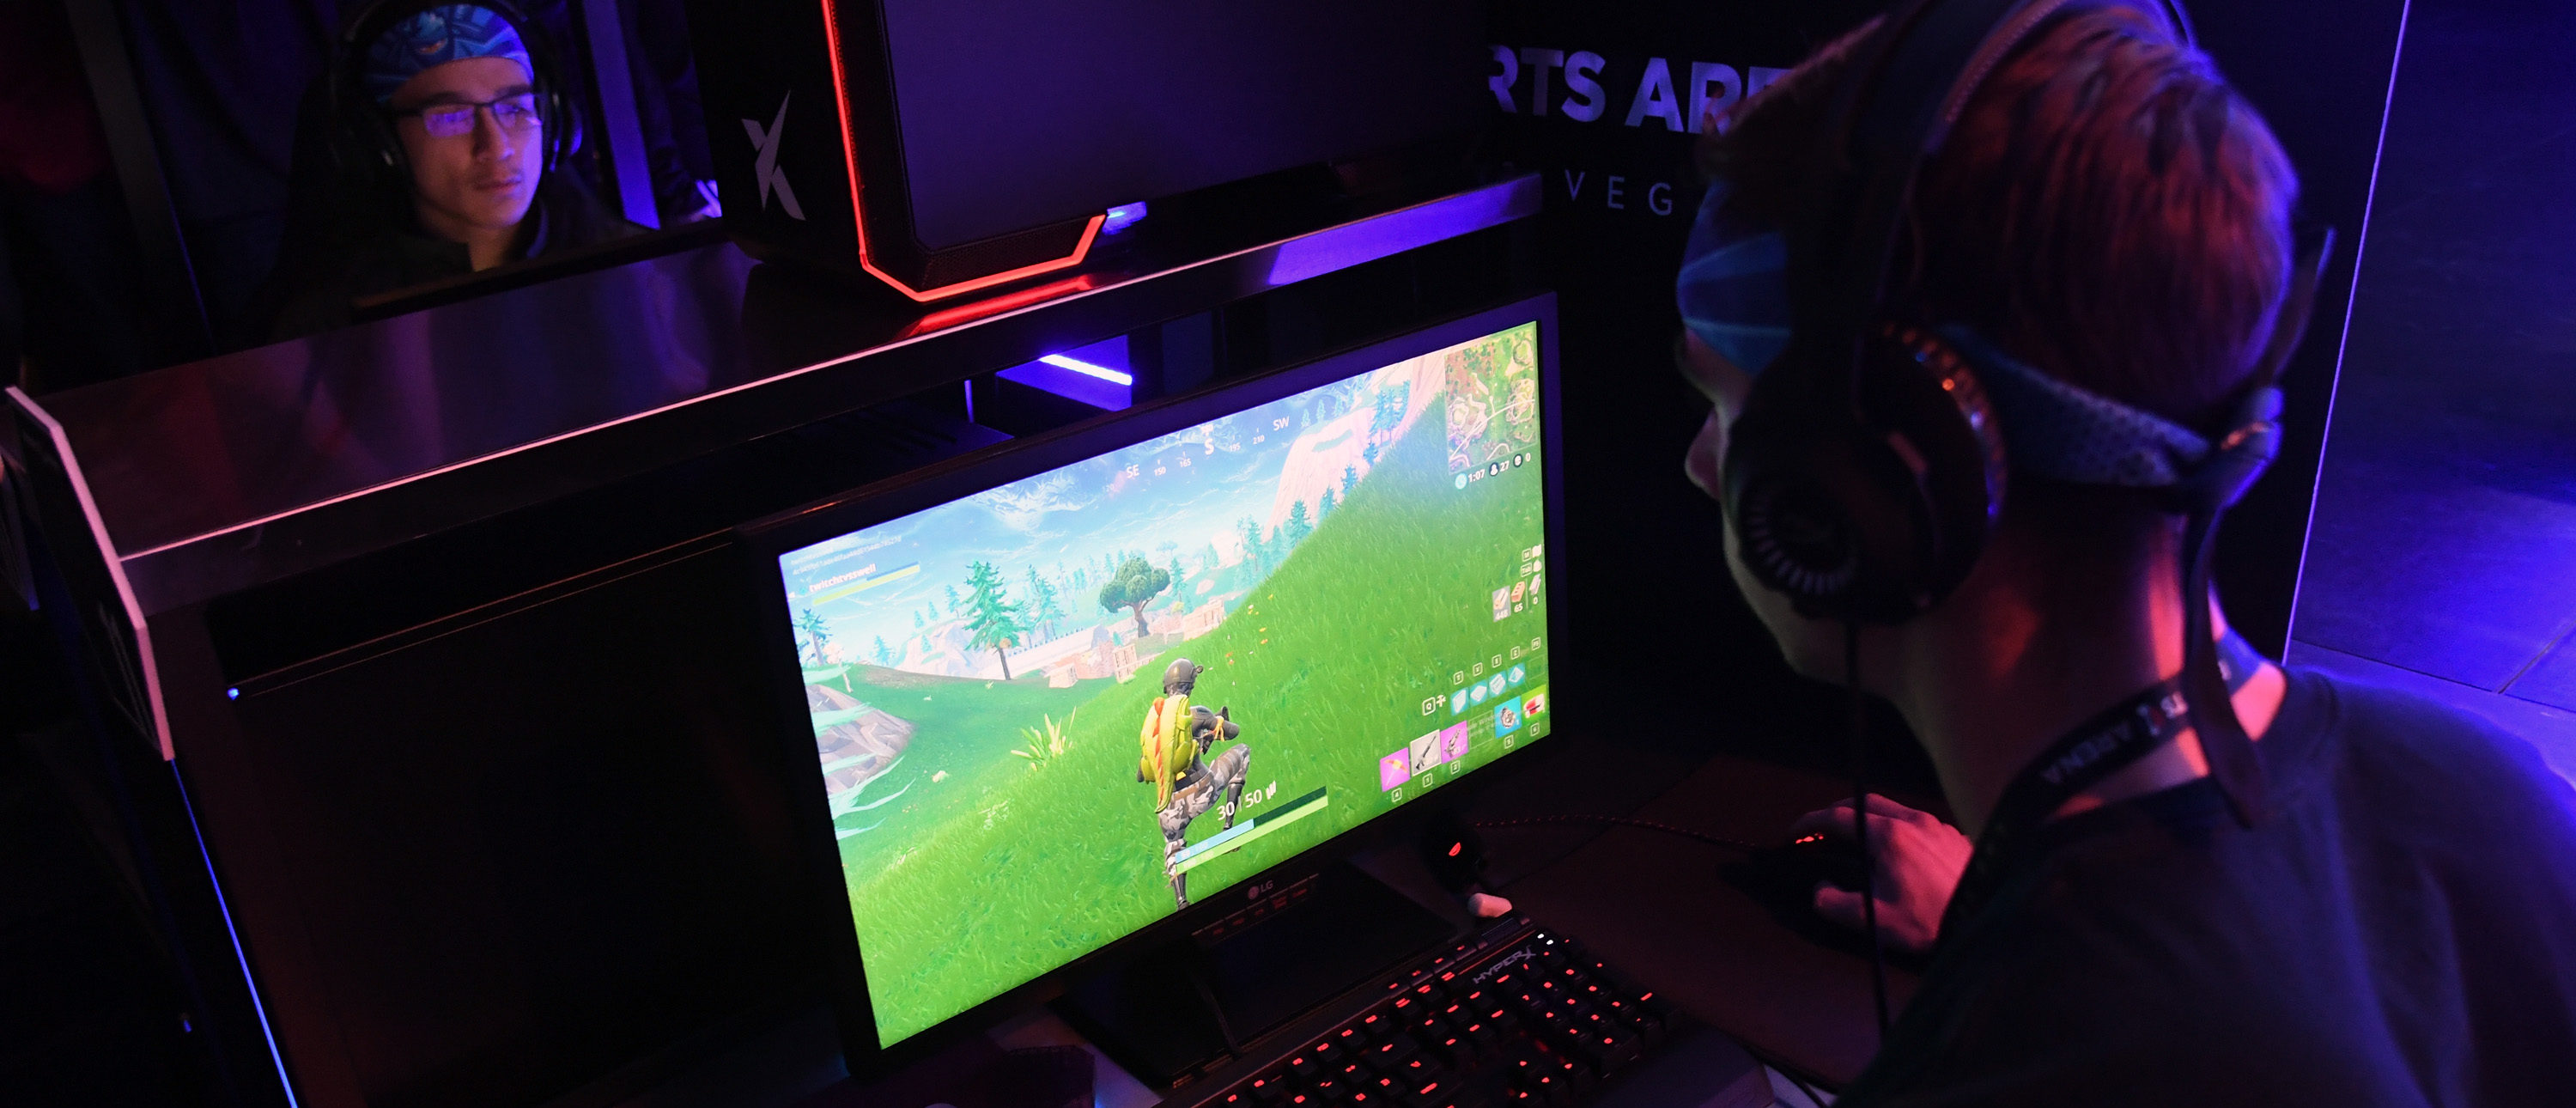 LAS VEGAS, NV - APRIL 21: Gamers play "Fortnite" against Twitch streamer and professional gamer Tyler "Ninja" Blevins during Ninja Vegas '18 at Esports Arena Las Vegas at Luxor Hotel and Casino on April 21, 2018 in Las Vegas, Nevada. Blevins is playing against more than 230 challengers in front of 700 fans in 10 live "Fortnite" games with up to USD 50,000 in cash prizes on the line. He is donating all his winnings to the Alzheimer's Association. (Photo by Ethan Miller/Getty Images)